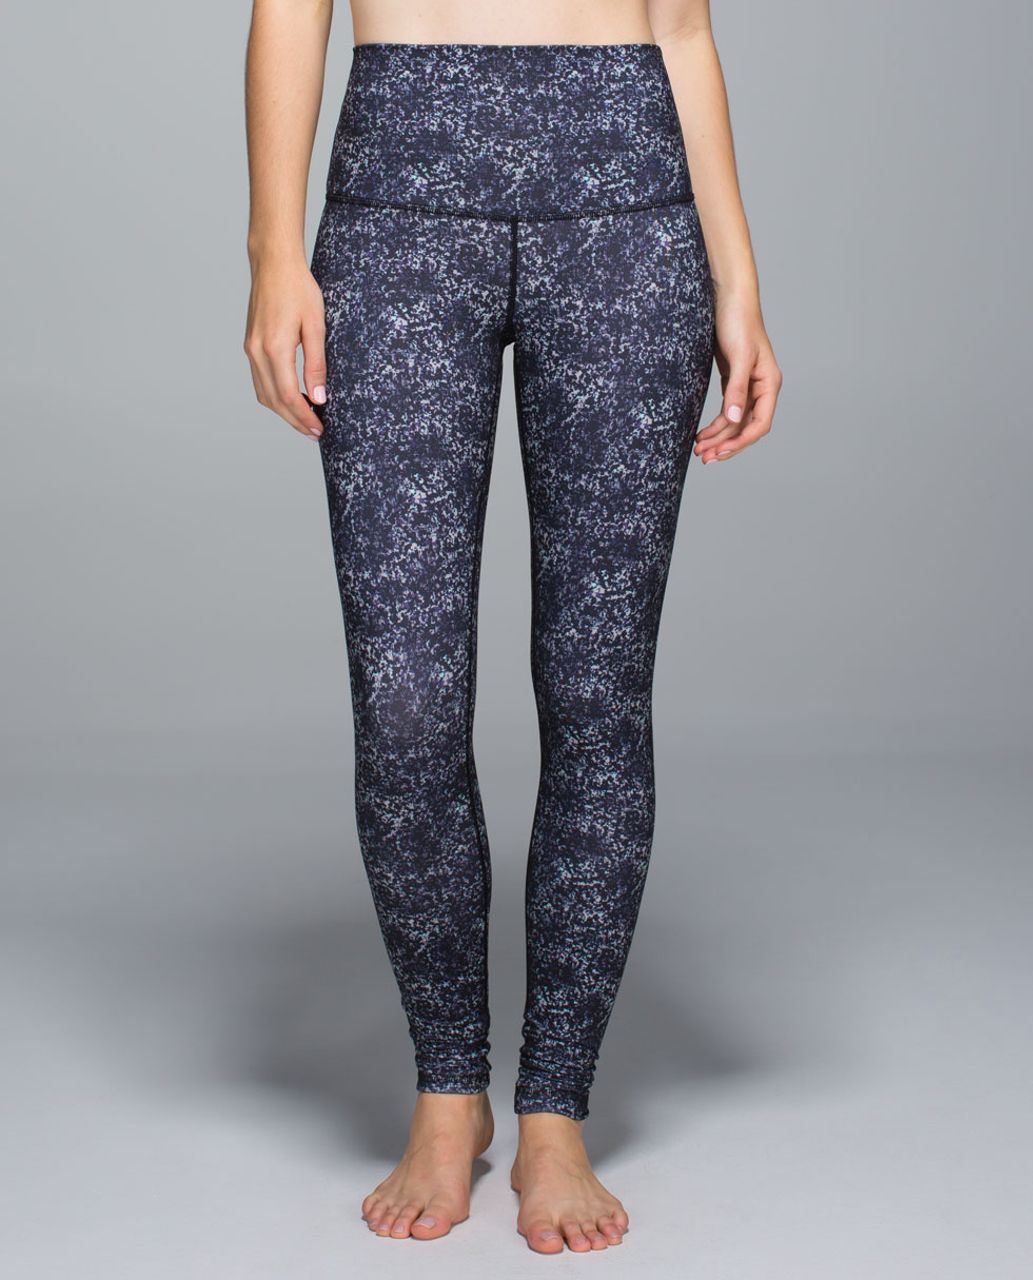 Lululemon Wunder Under Pant *Full-On Luon (Roll Down) - Rocky Road Sand Dune Toothpaste